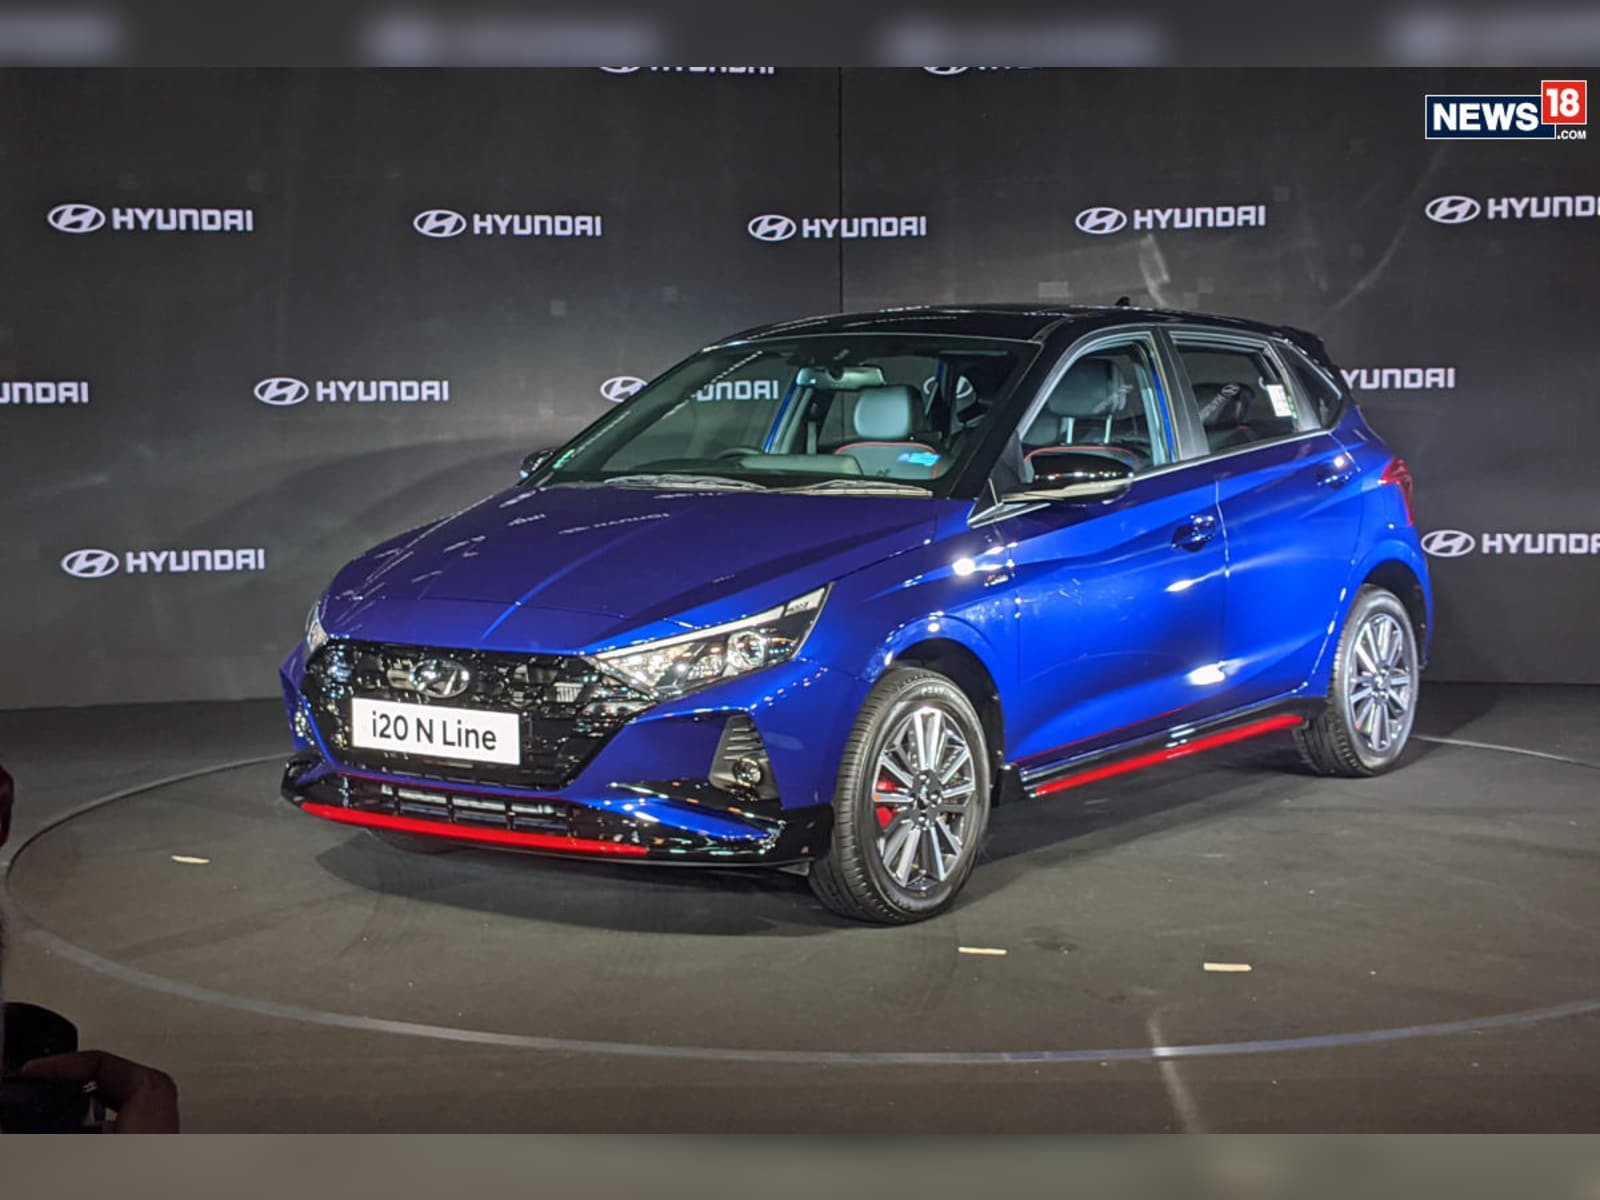 Hyundai launches 'i20 N Line' in India starting at Rs 9.84 lakh